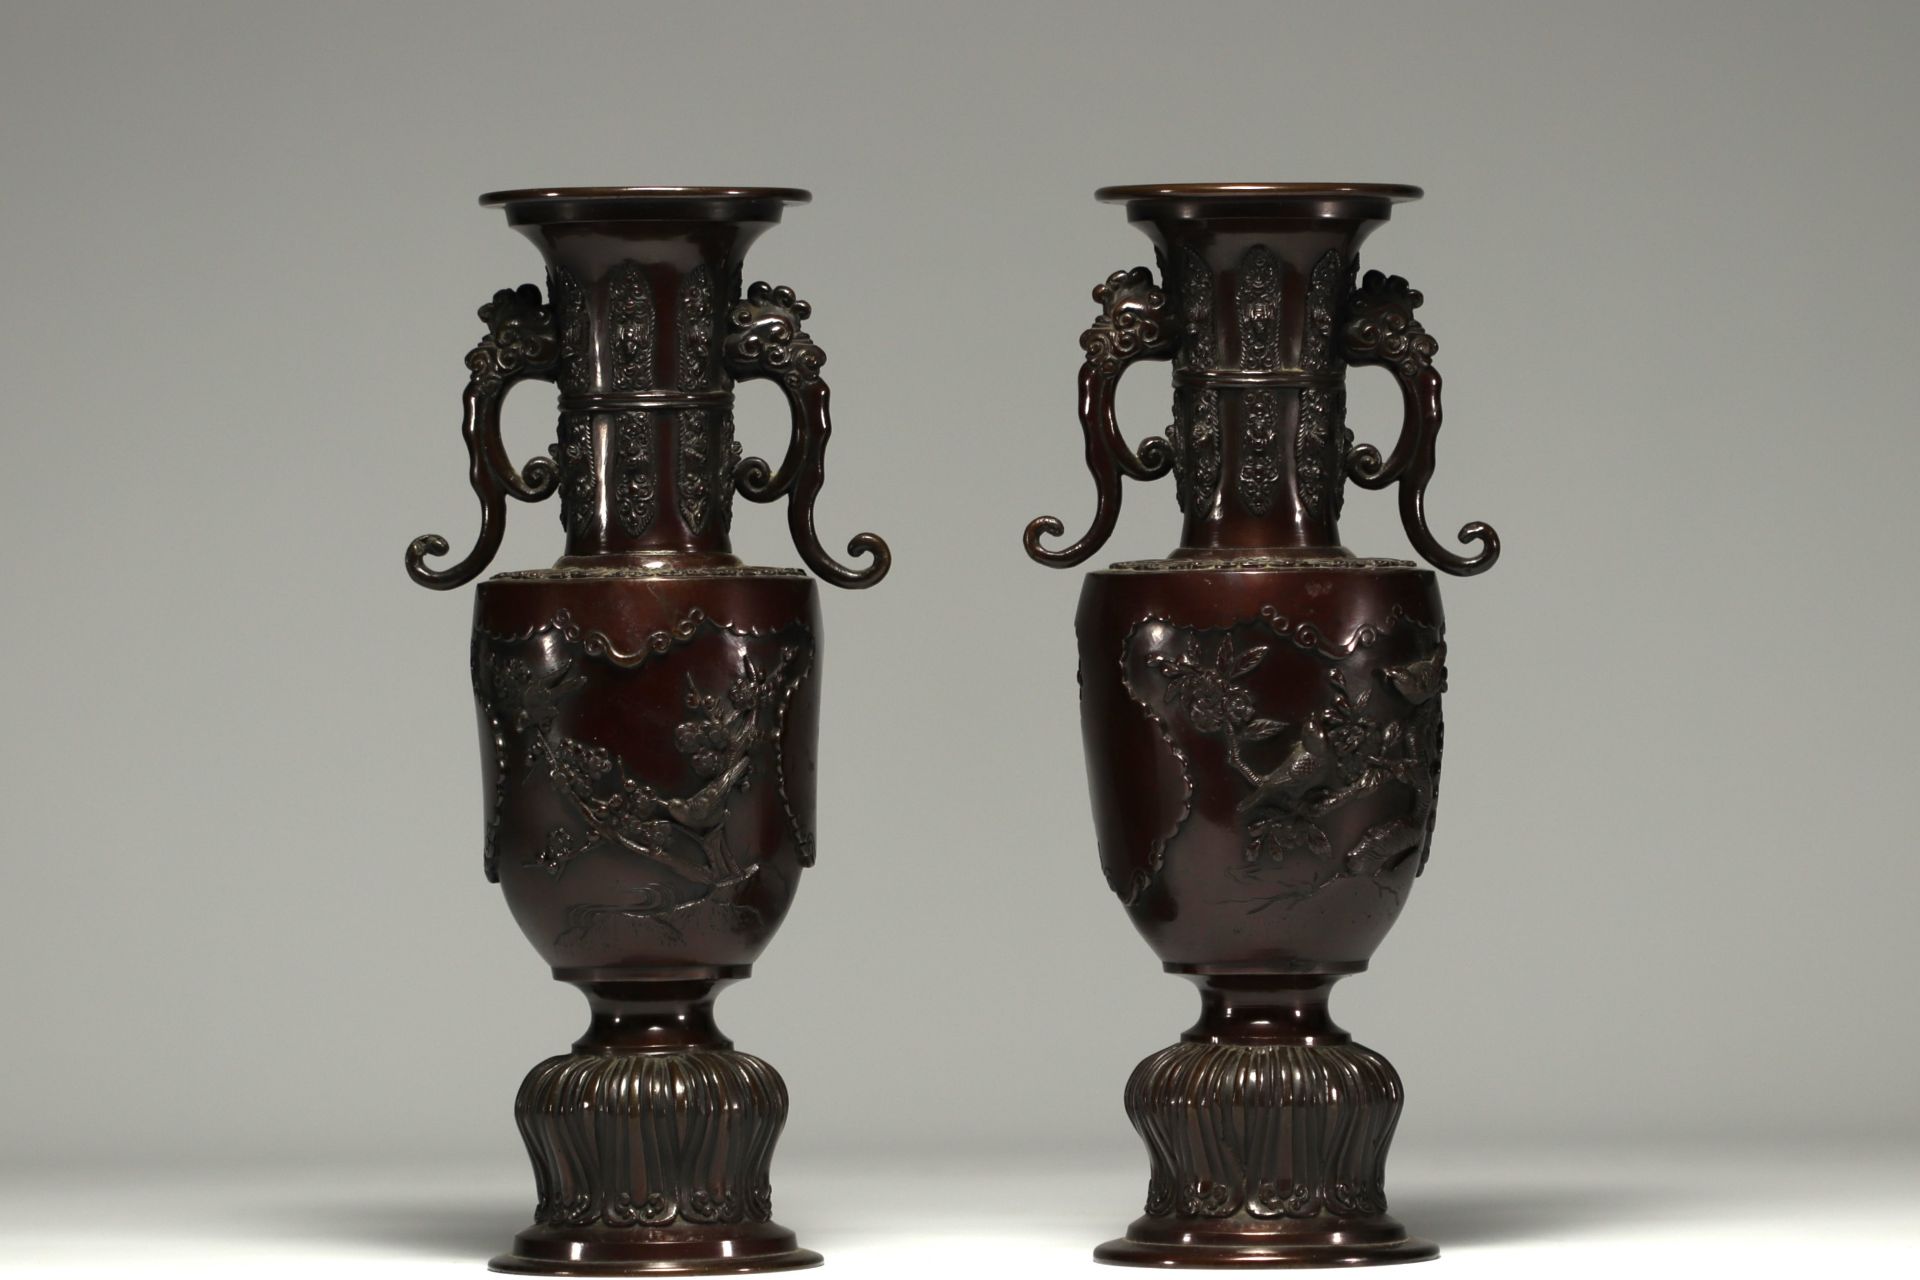 Japan - A pair of bronze vases with a brown patina, decorated with birds. - Image 2 of 3